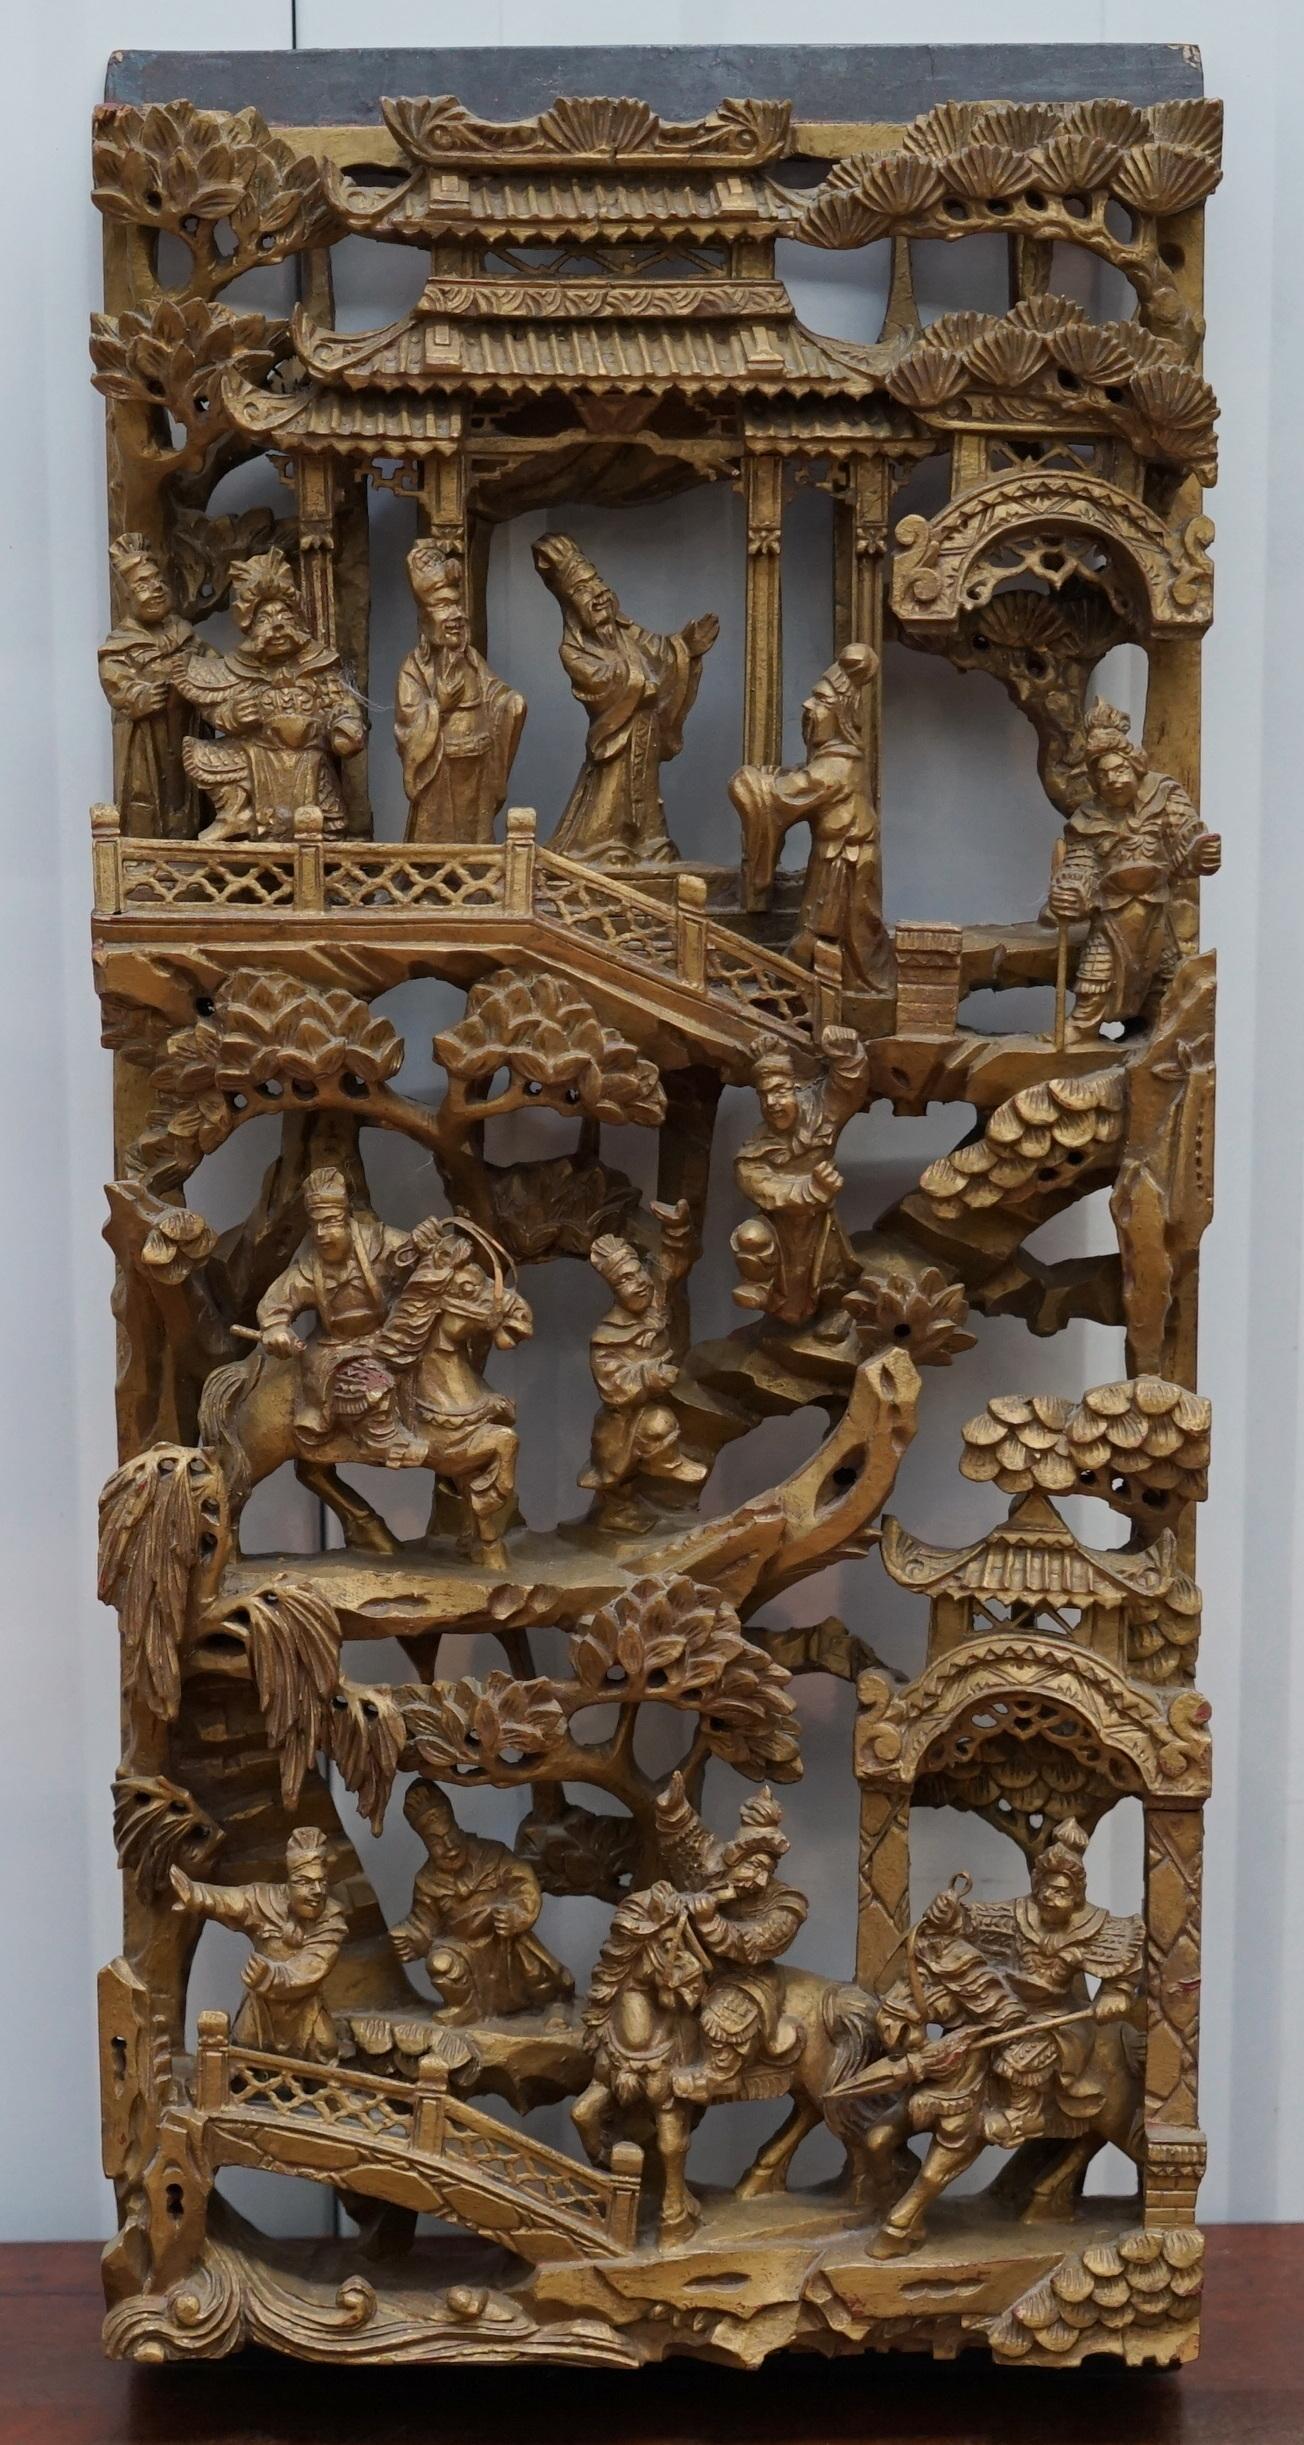 Chinese Export Rare Antique Giltwood Hand-Carved Chinese Panel, Late 19th-Early 20th Century